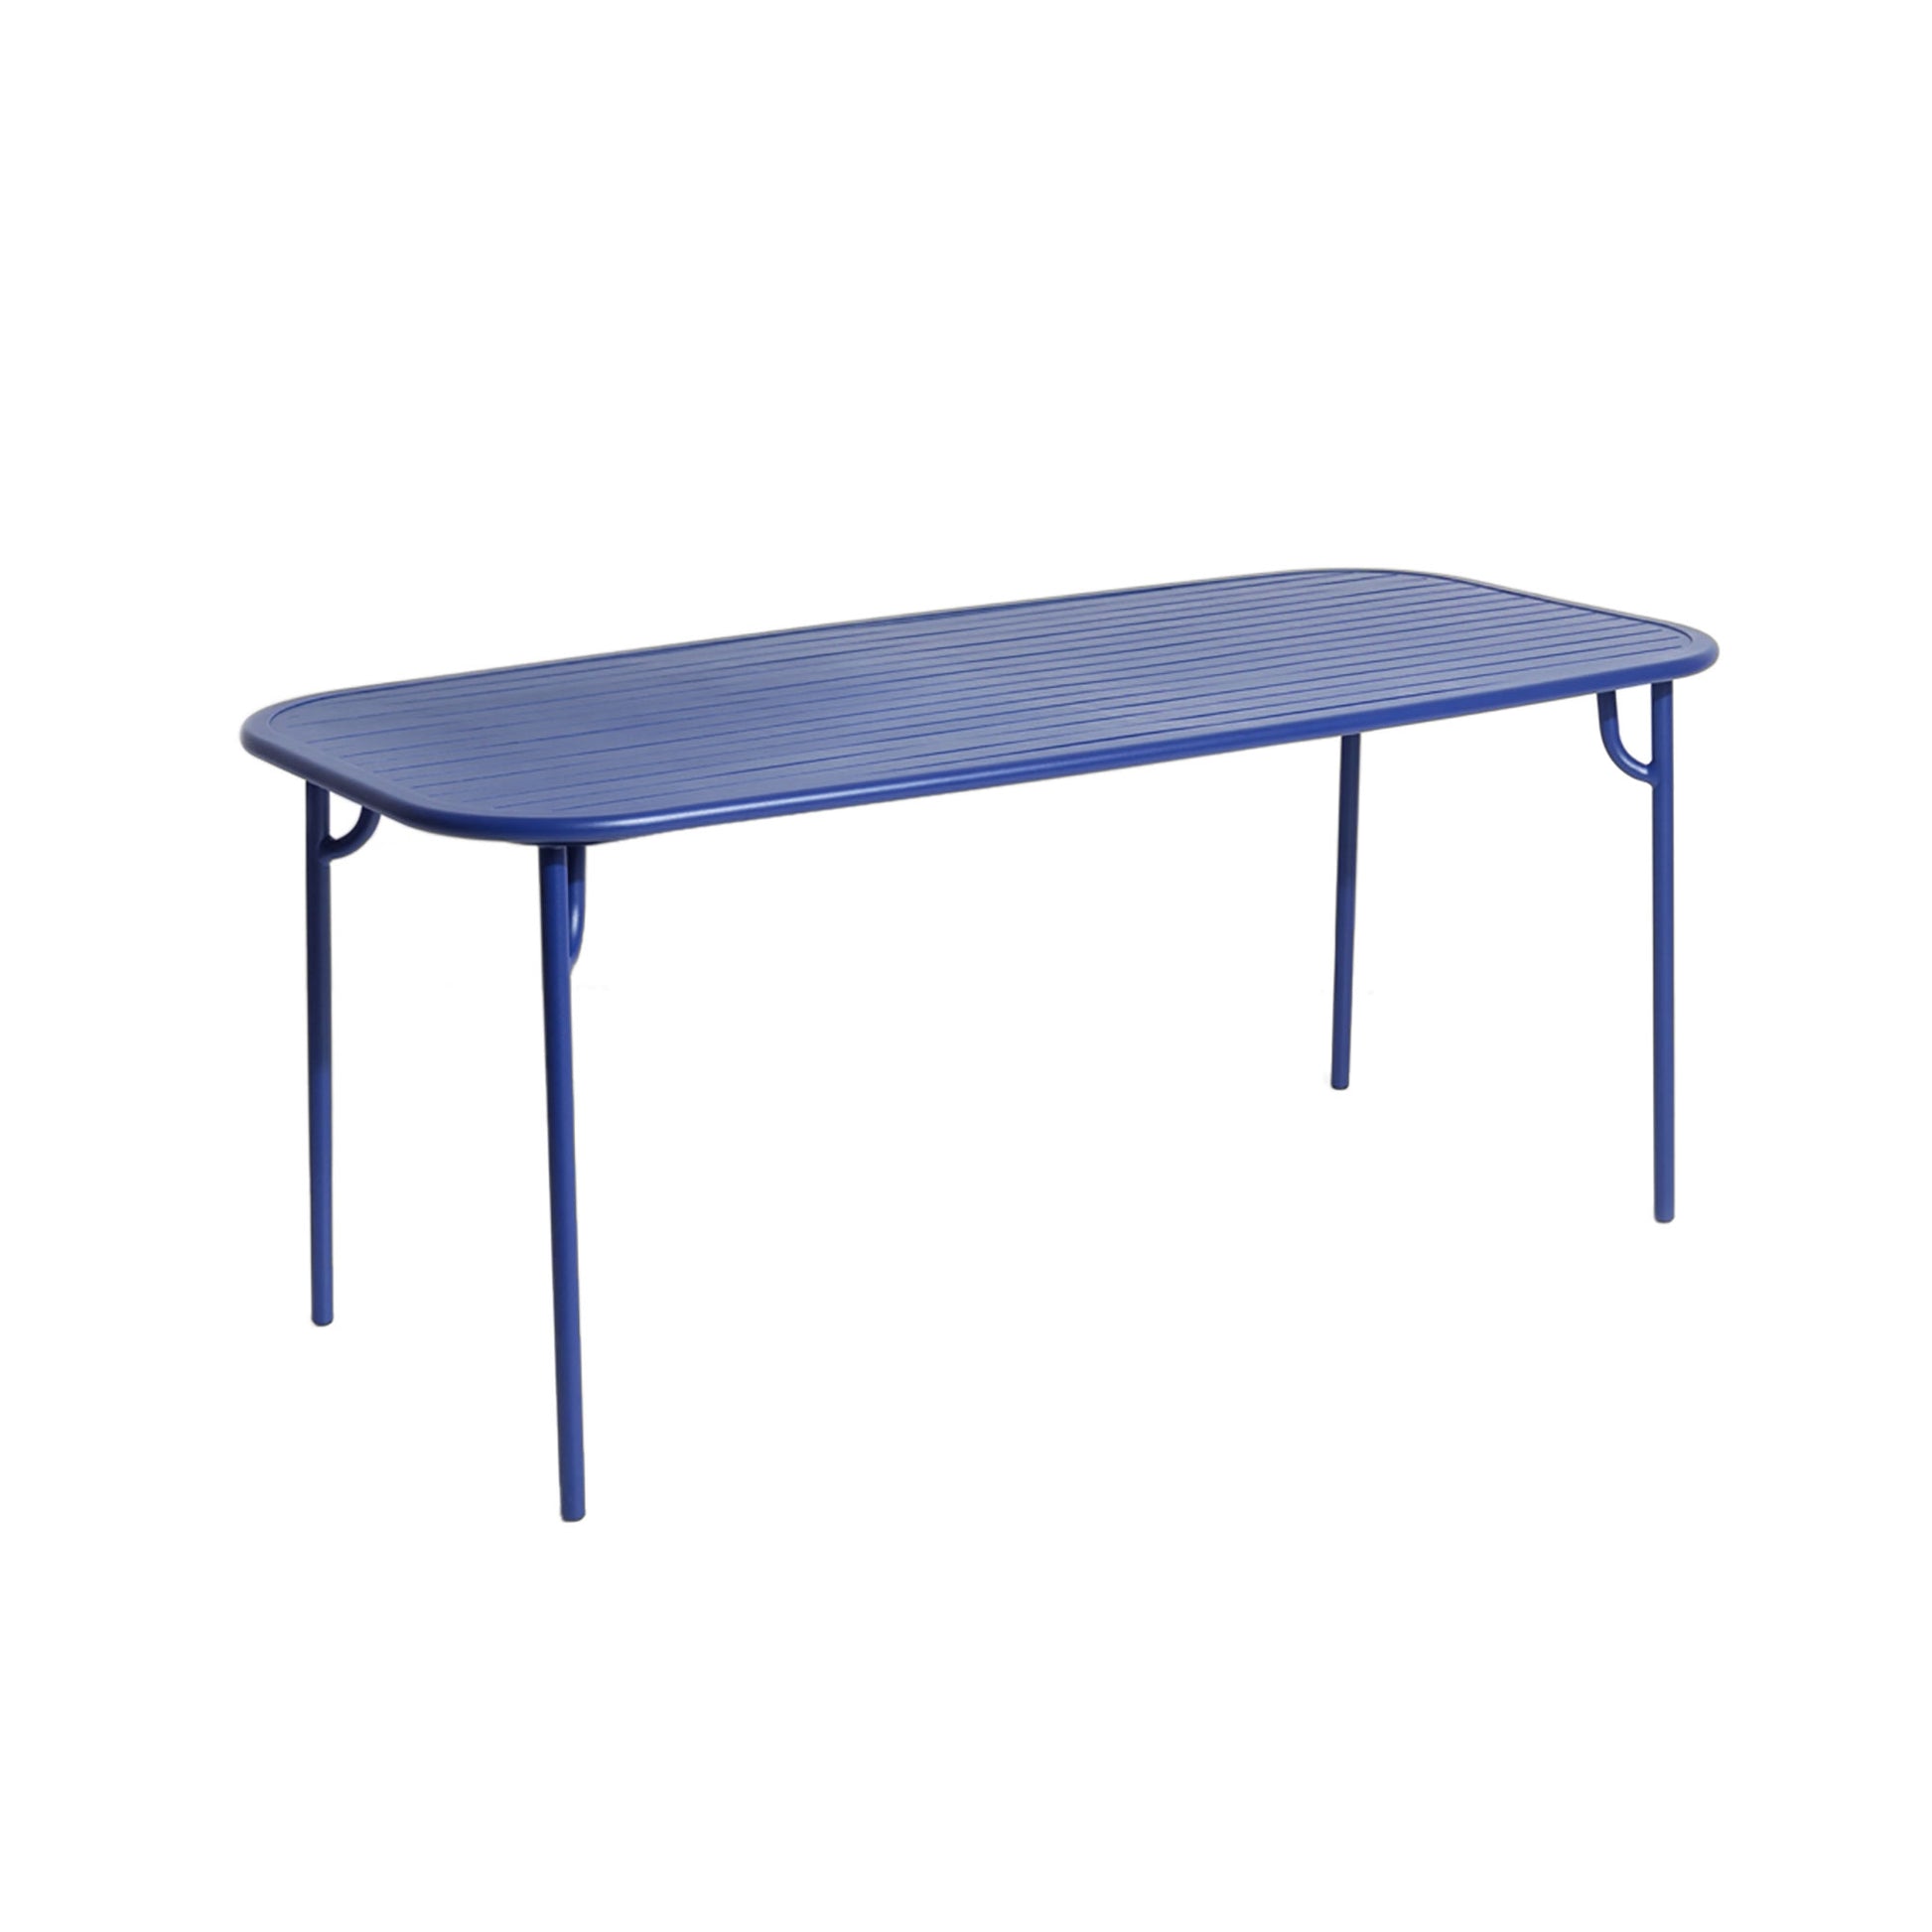 WEEK-END Rectangular Table by Petite Friture #Blue